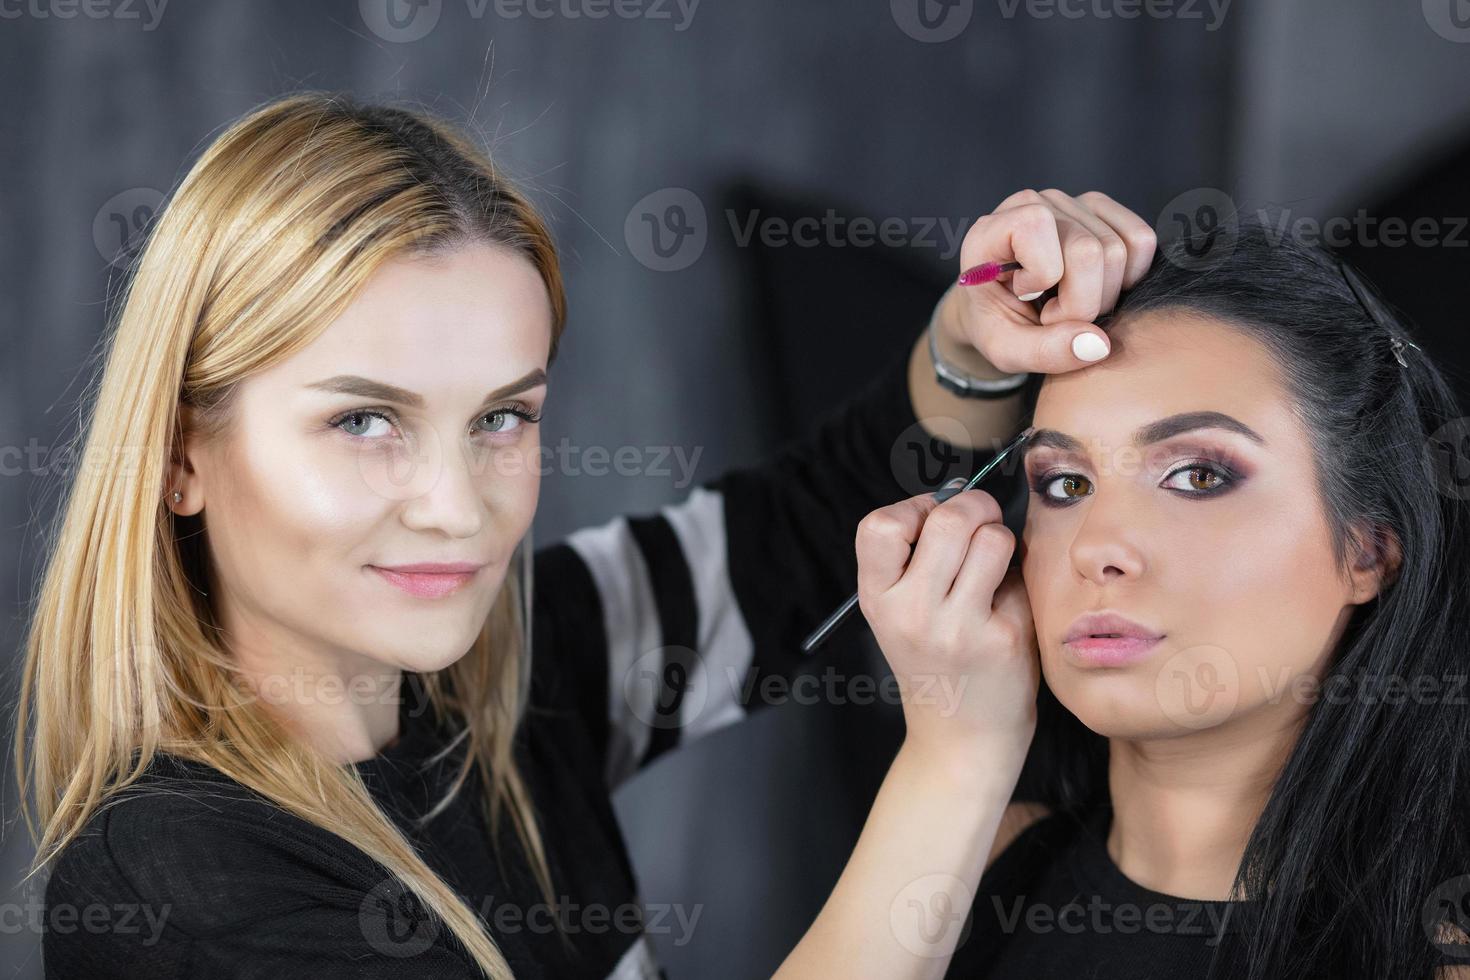 The artist puts a face make up on a nice young model photo